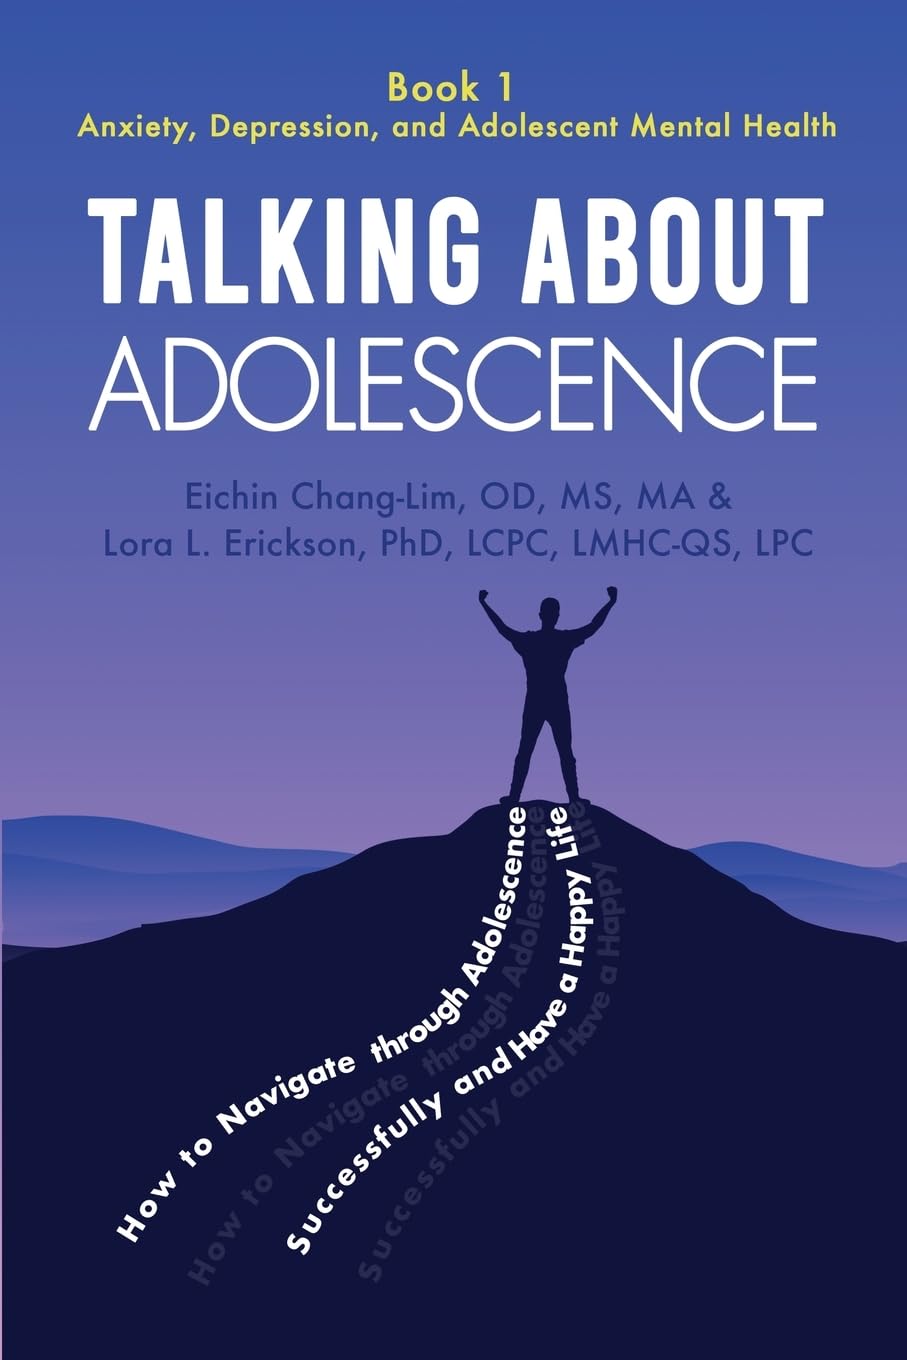 "Talking About Adolescence: Anxiety, Depression, and Adolescent Mental Health" by Eichin Chang-Lim, OD, MS, MA and Lora L. Erickson, PhD, LCPC, LMHC-QS, LPC is a powerful guide for youth wellbeing